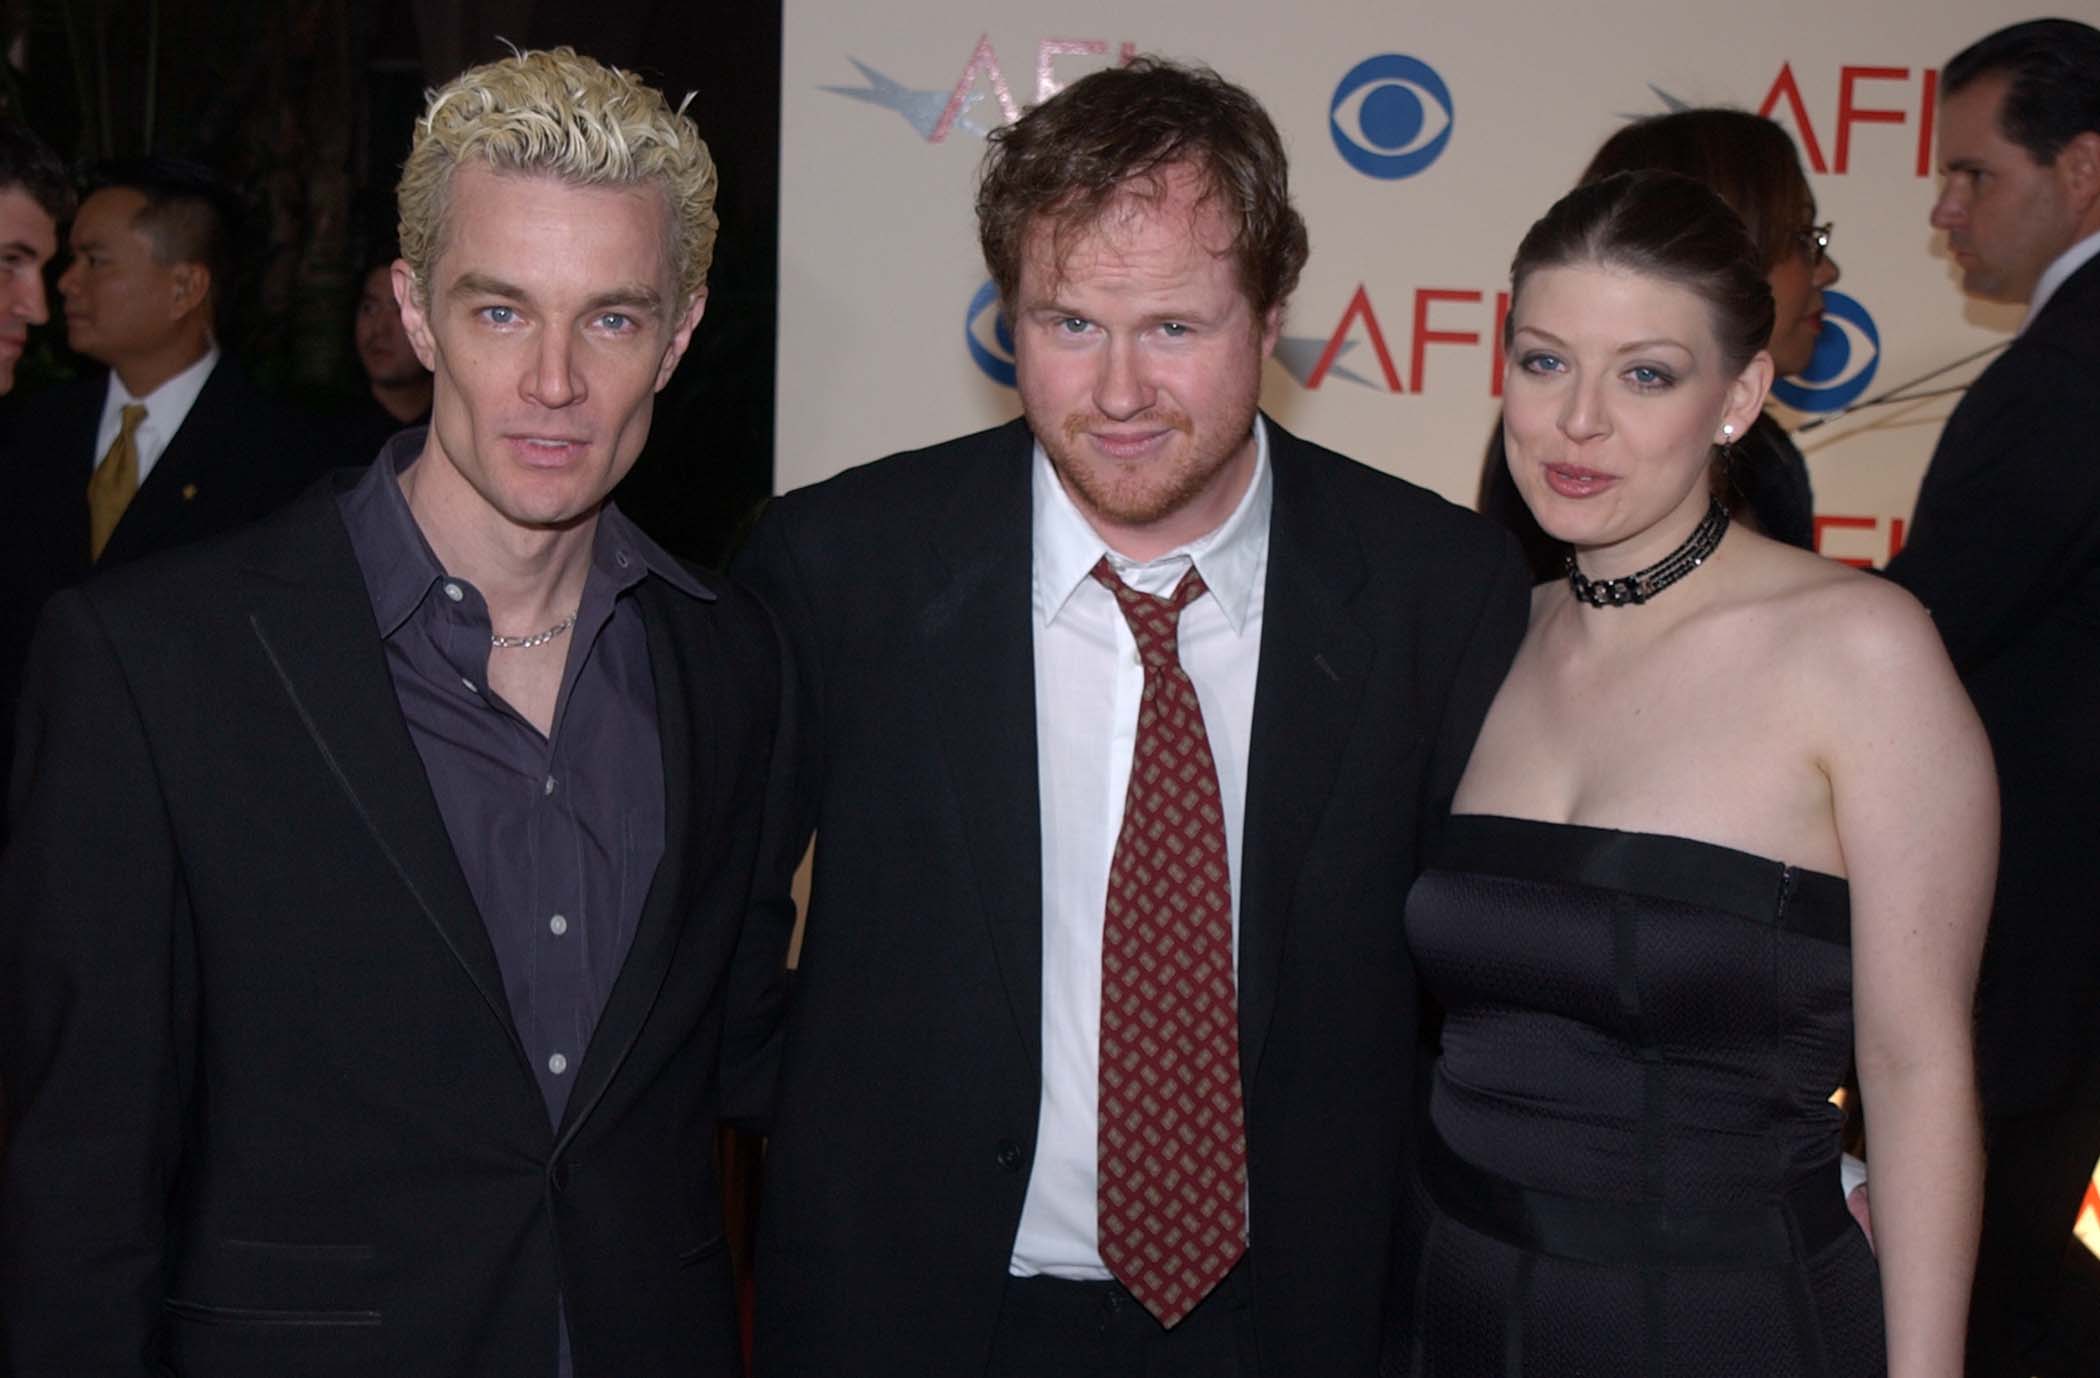 Joss Whedon with James Marsters and Amber Benson